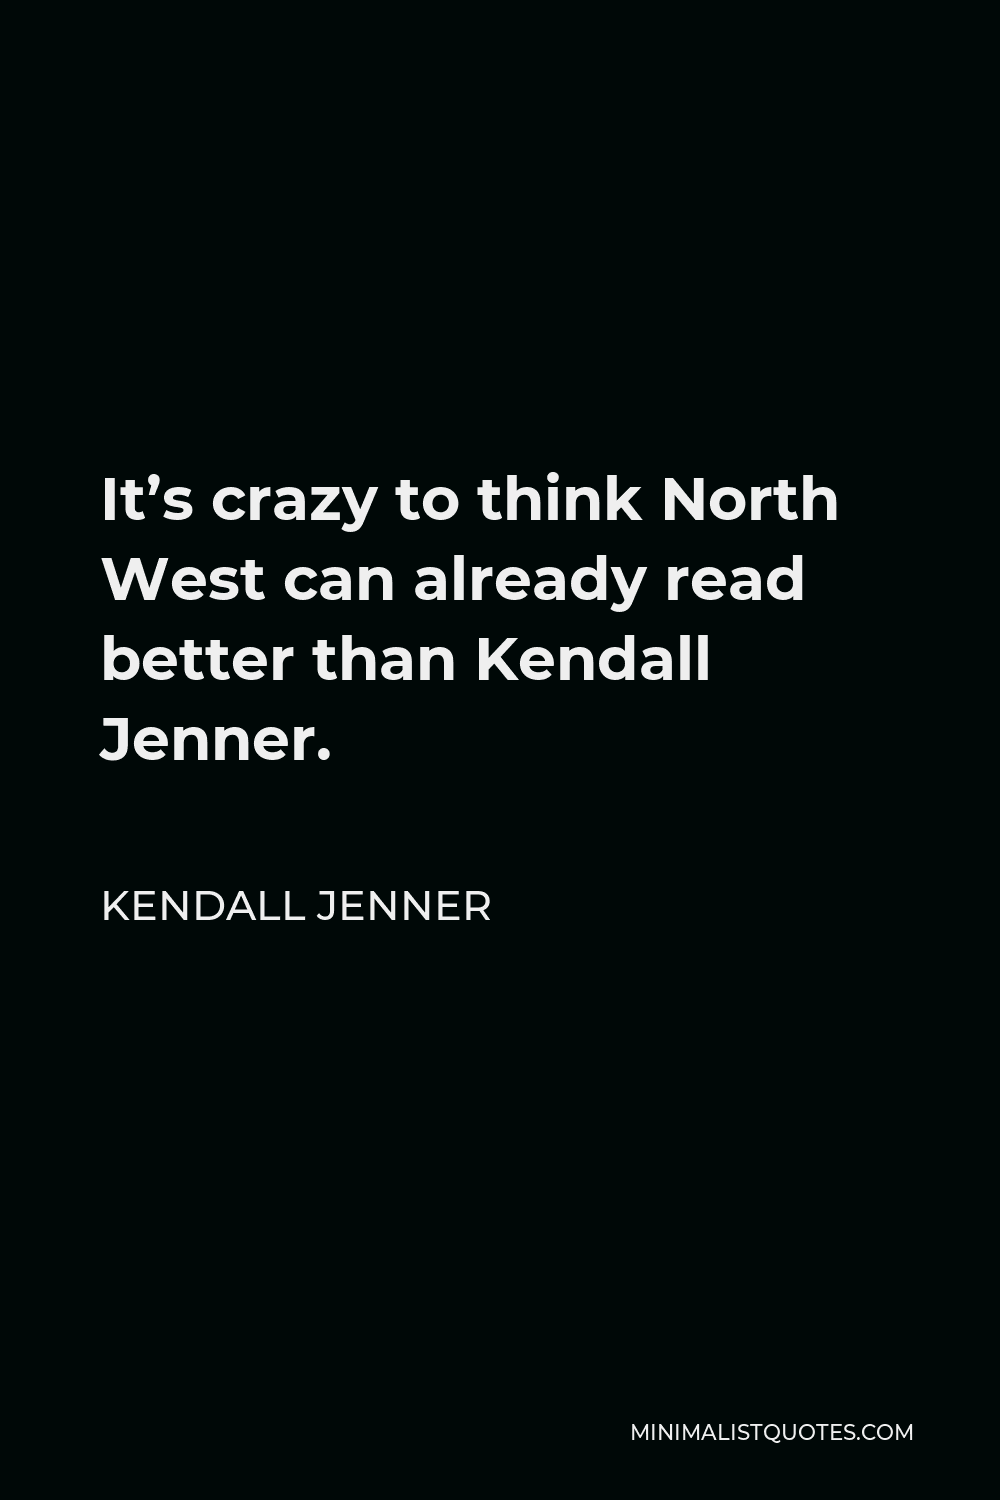 Kendall Jenner Quote - It’s crazy to think North West can already read better than Kendall Jenner.